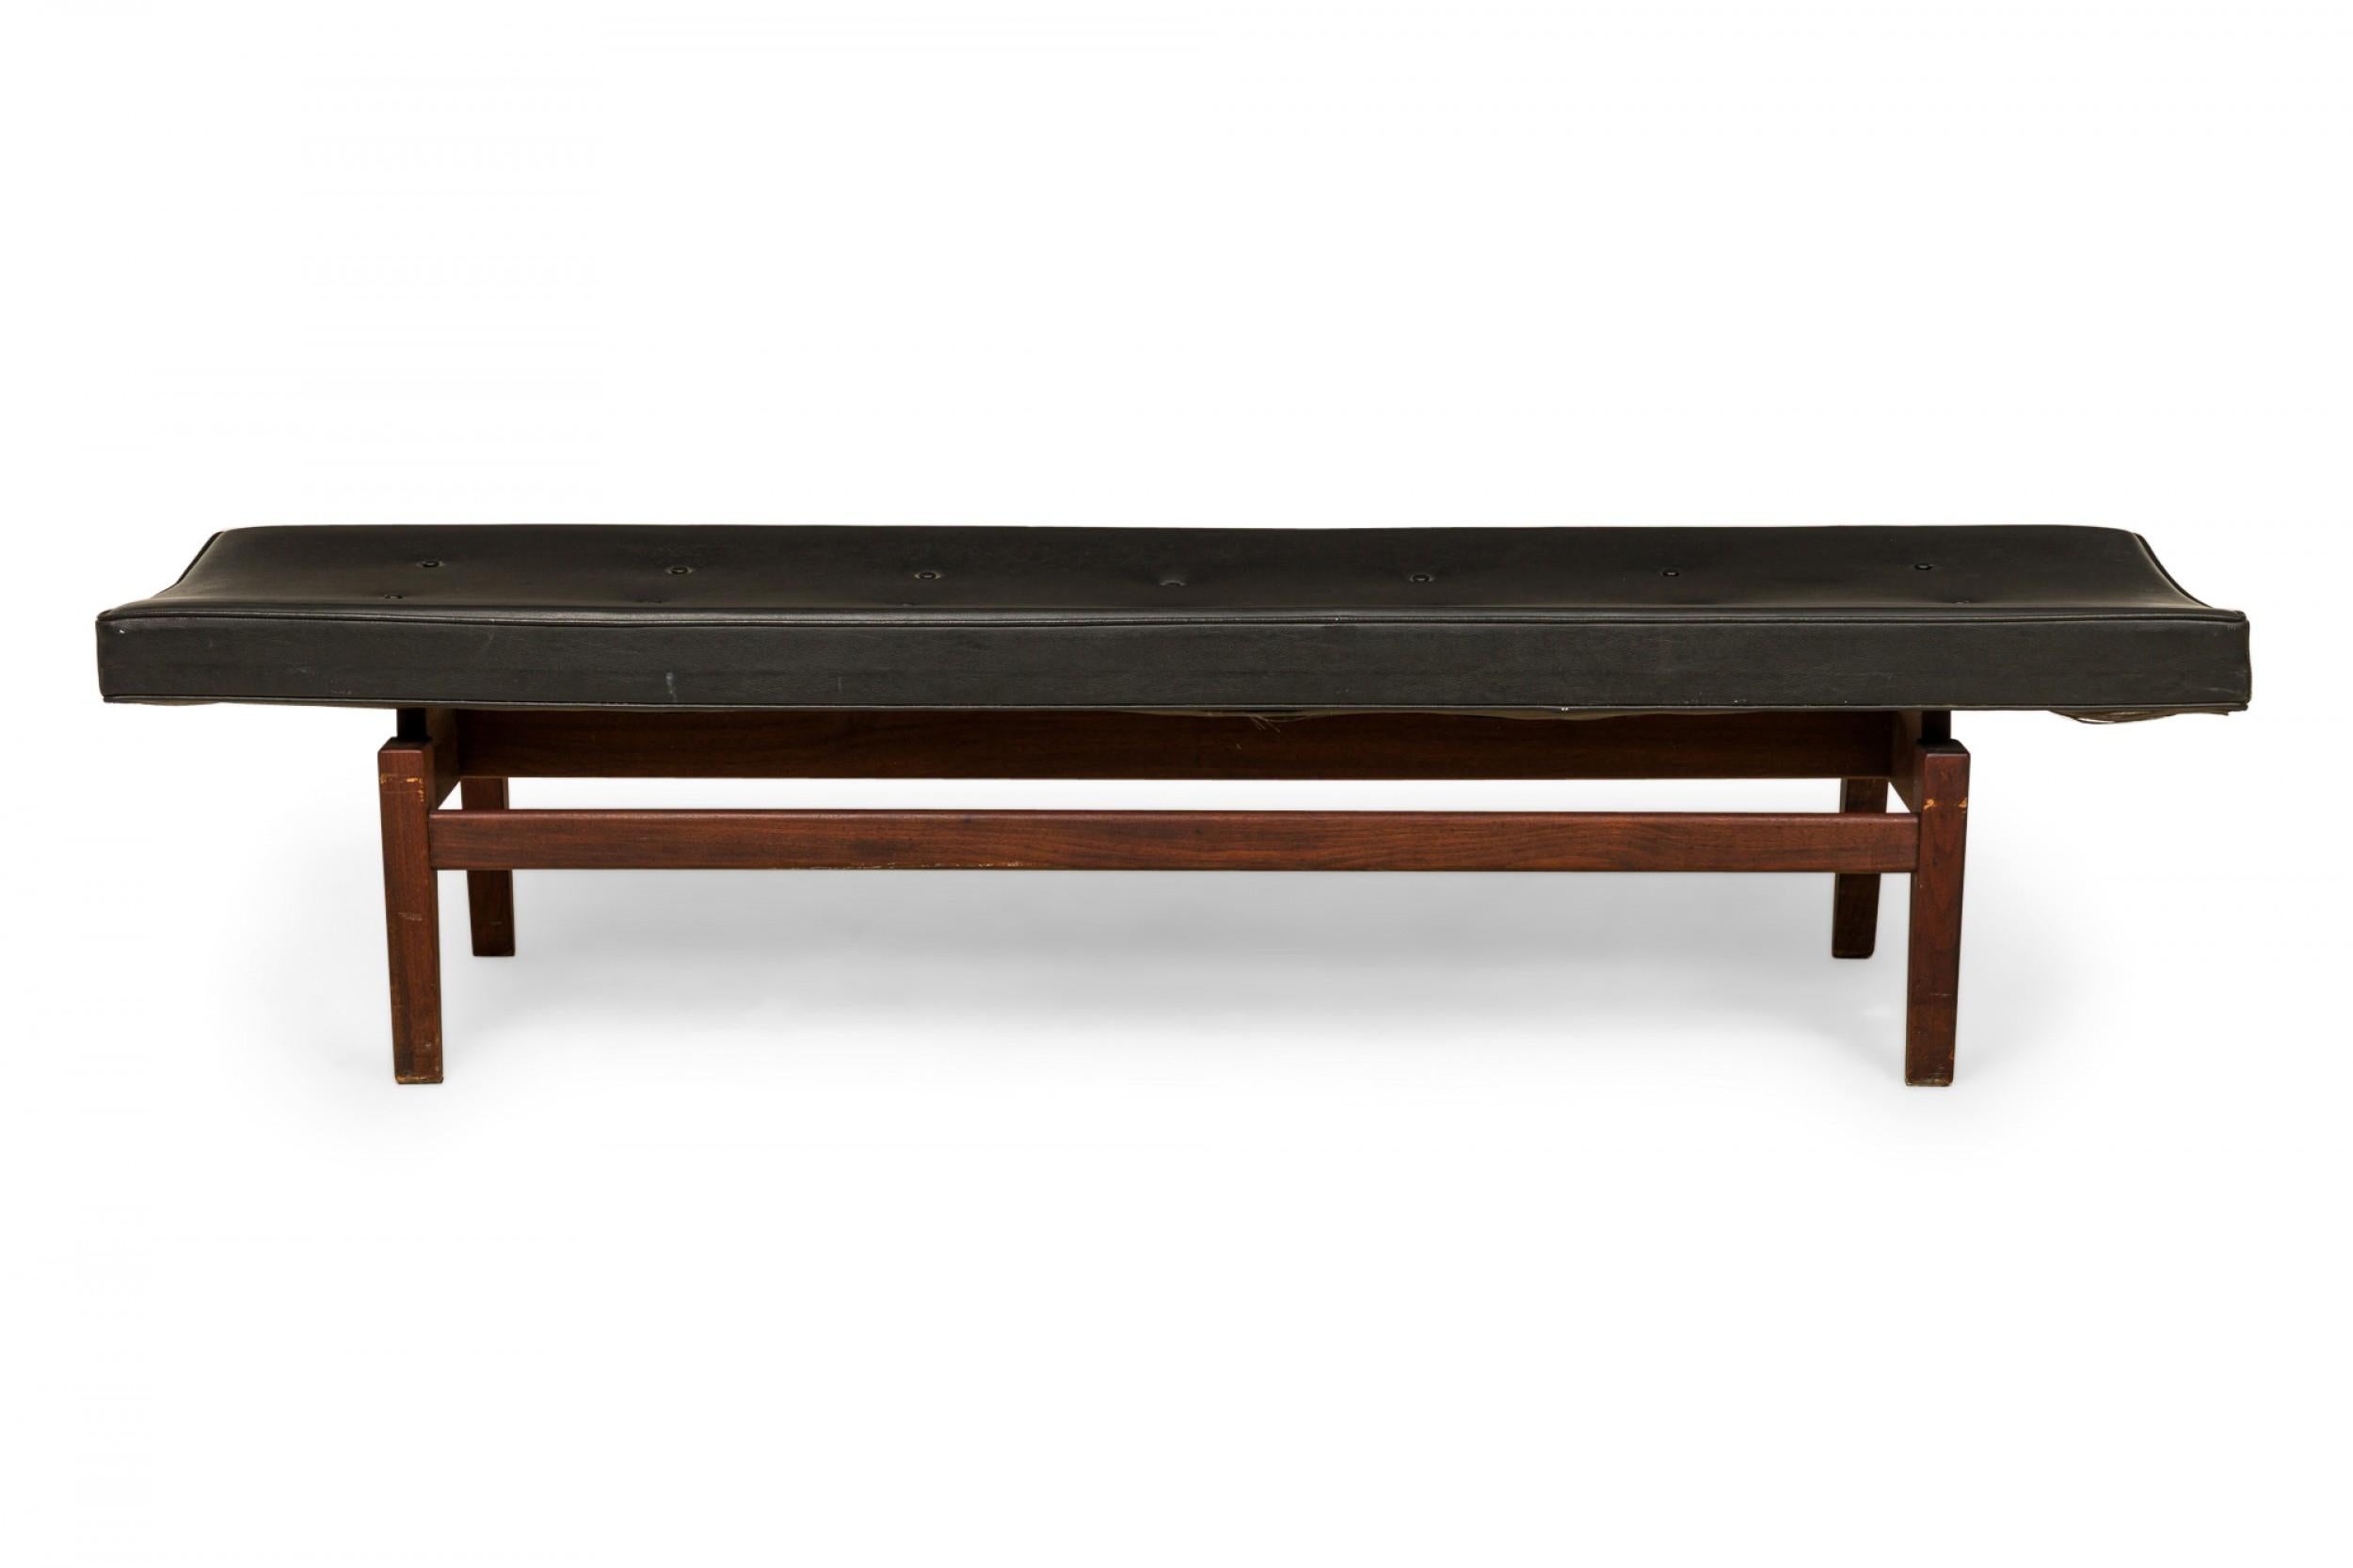 Danish Mid-Century floating bench with a black vinyl button tufted seat resting on a wooden floating frame base. (JENS RISOM).
 